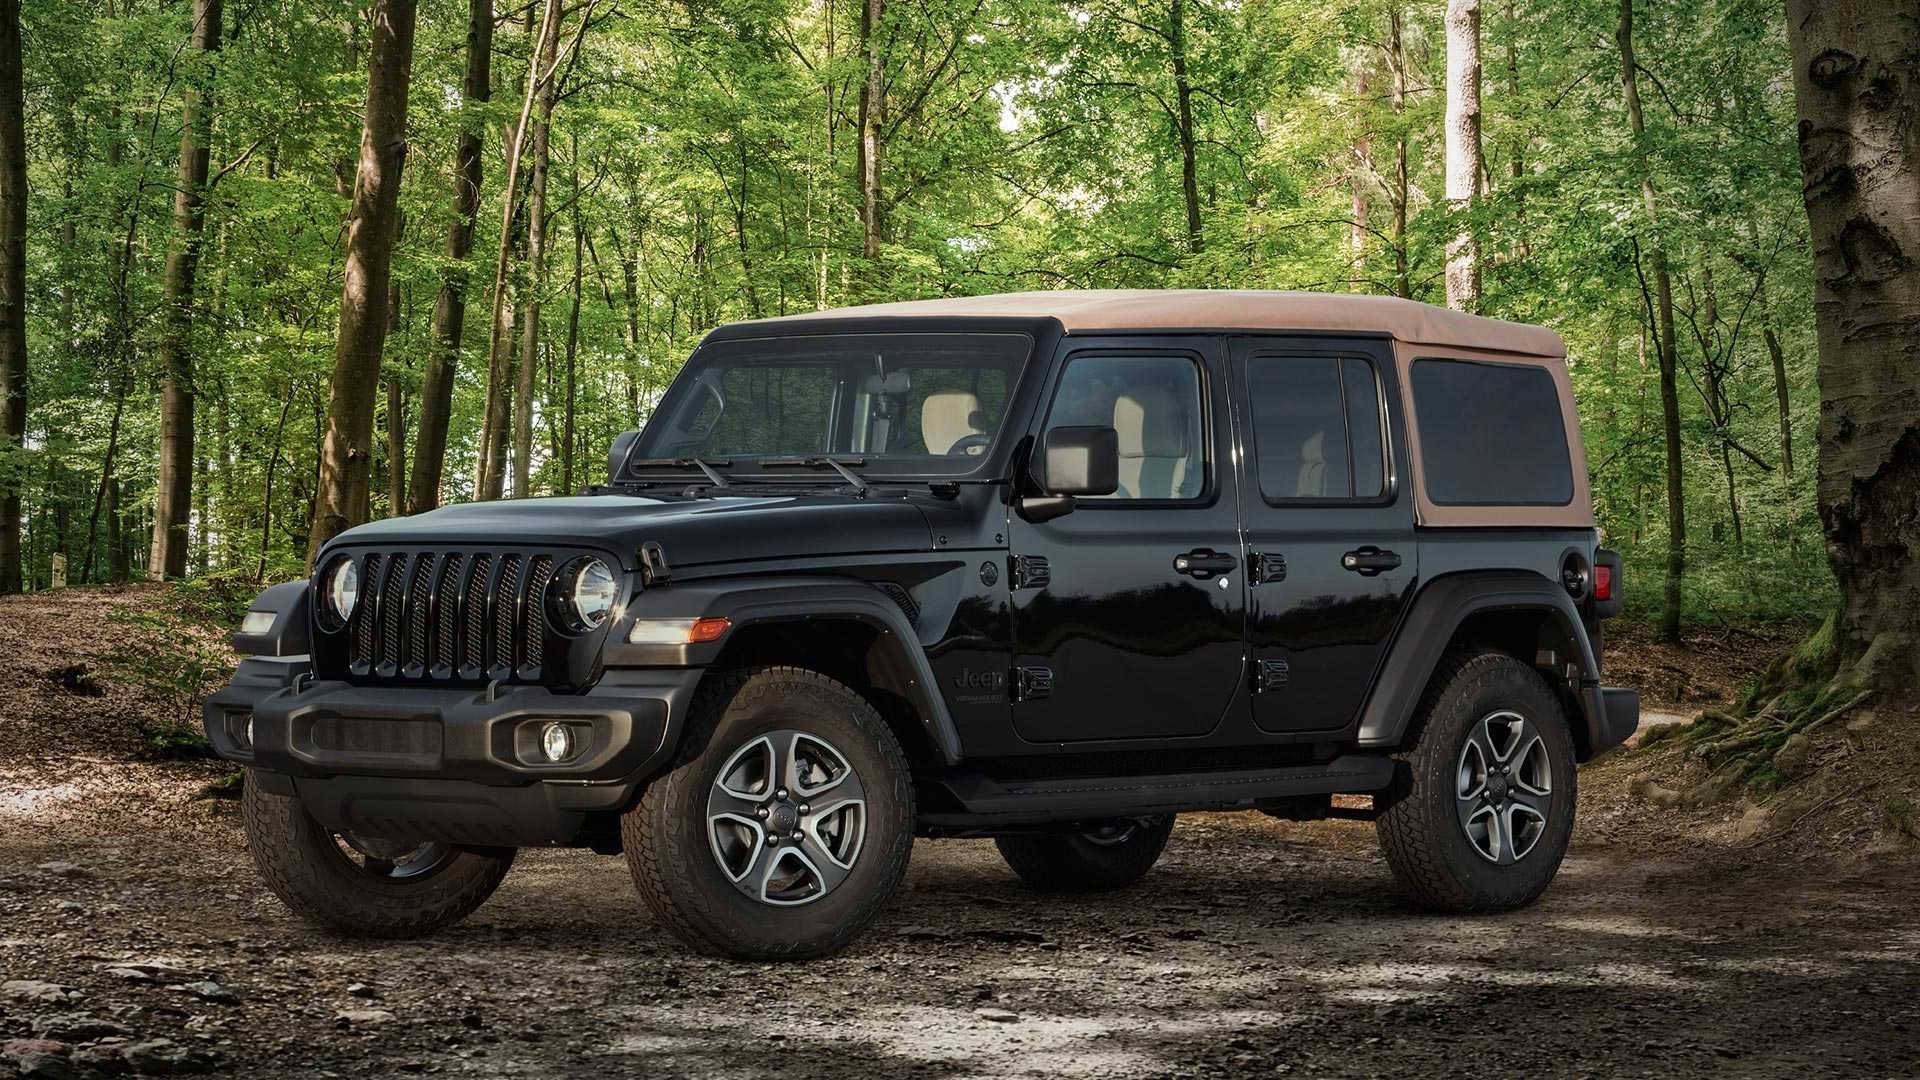 Bold And Ready: The Black Jeep Suv